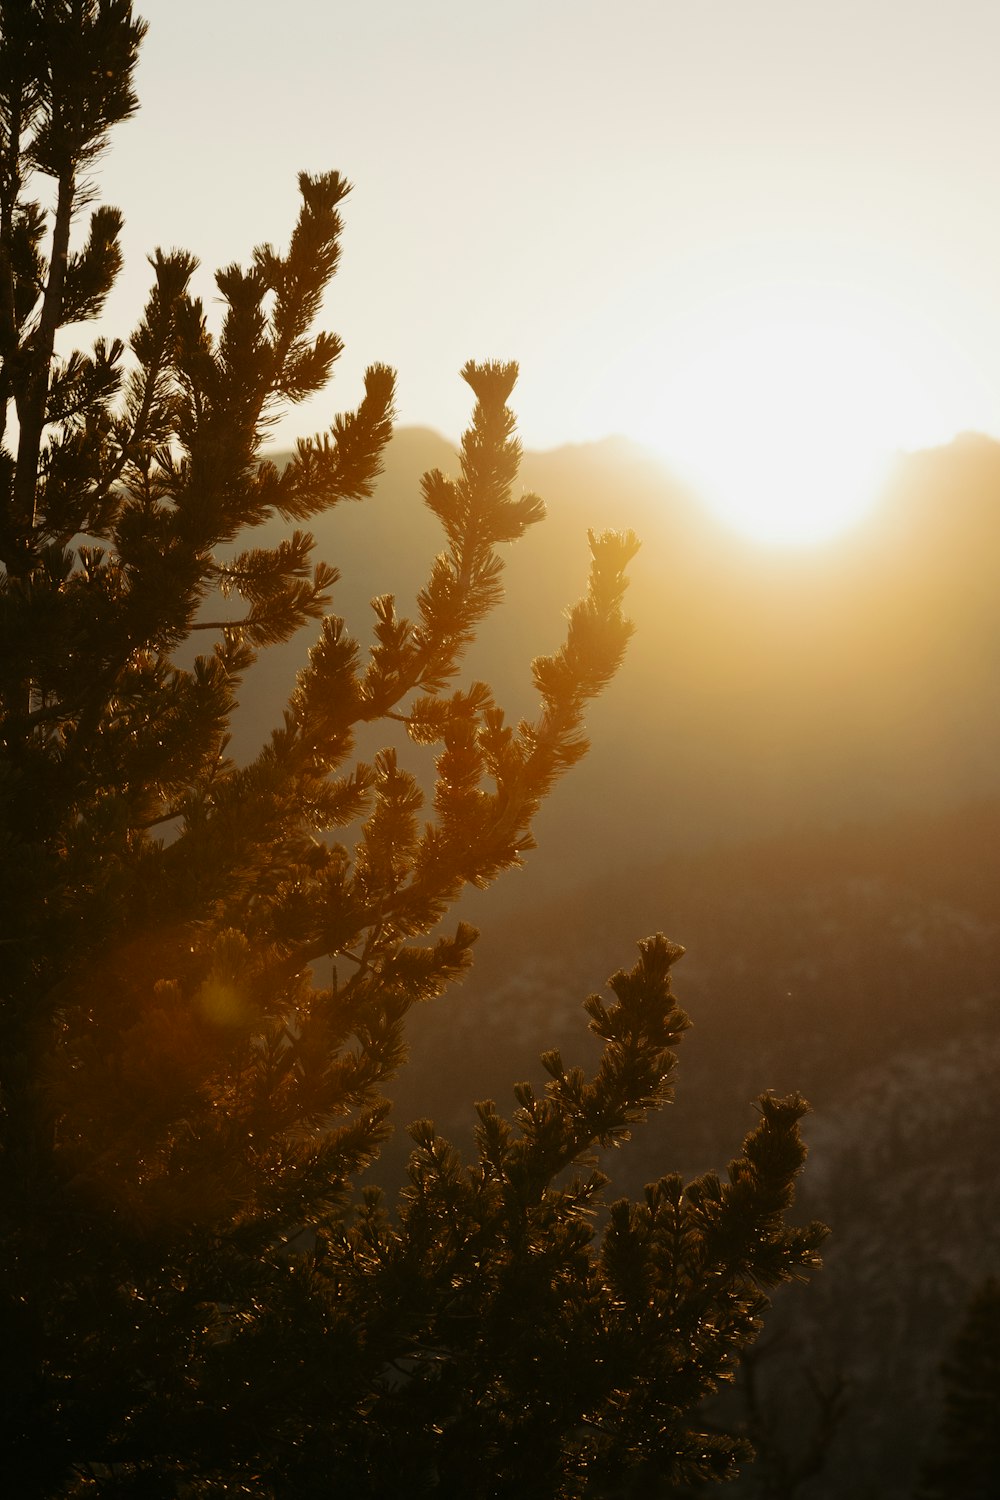 a pine tree with the sun setting in the background